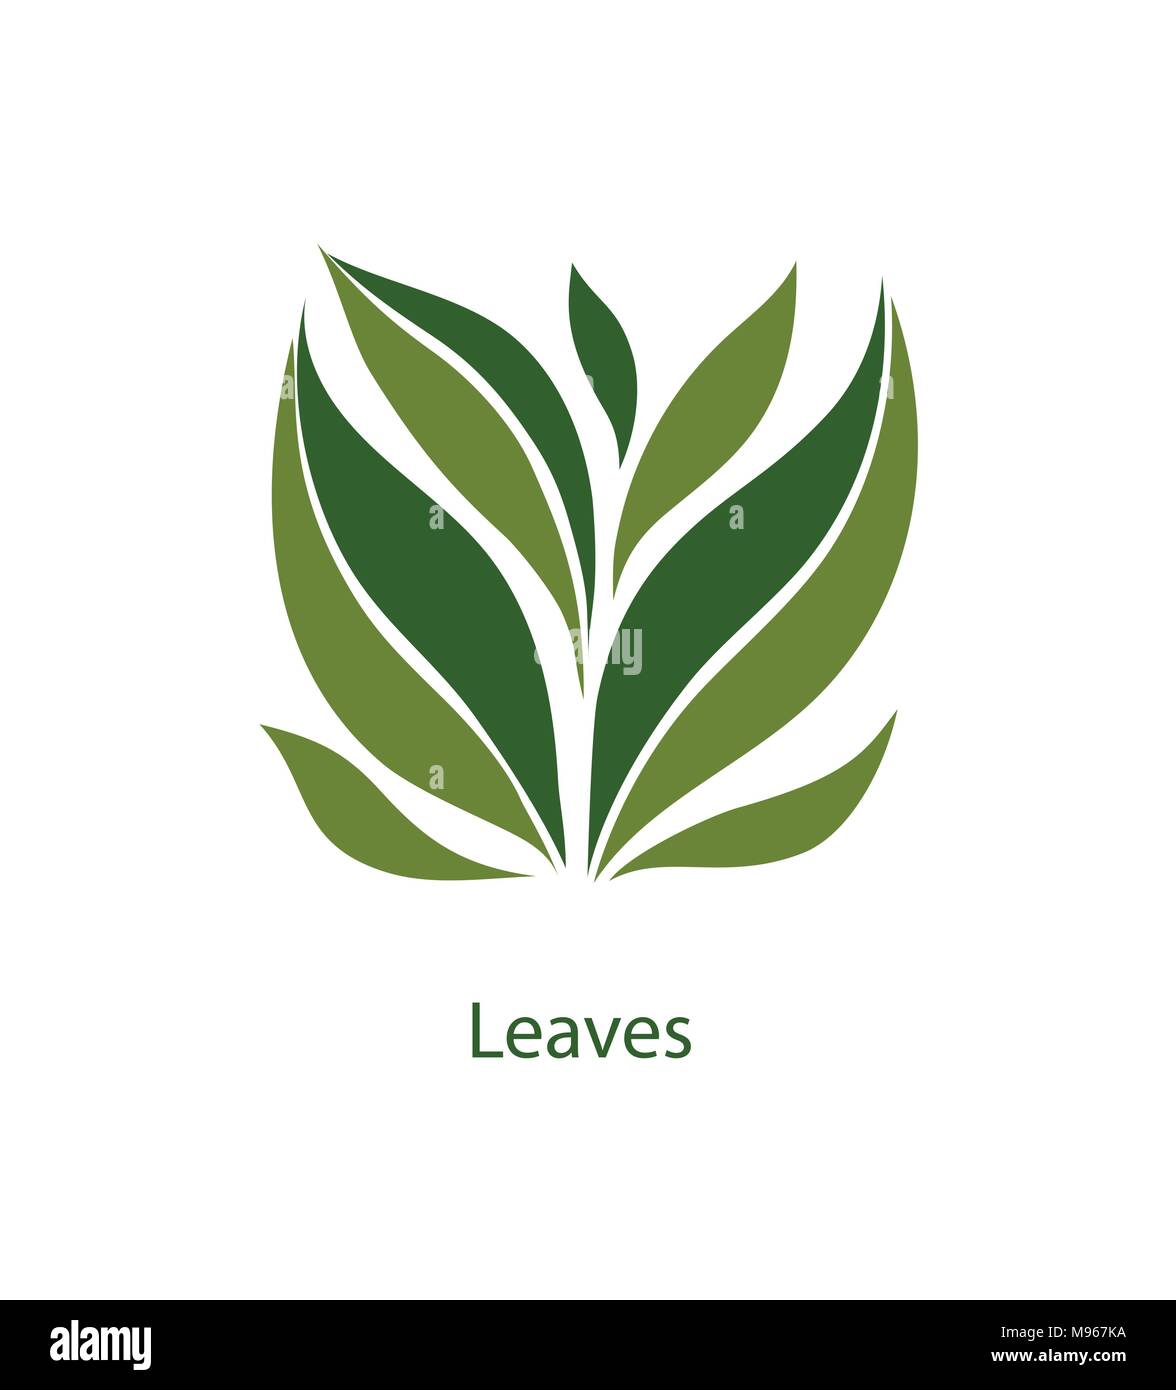 Green leaves of trees and plants. Elements for eco, organic and bio logos. Leaves icon vector isolated on white background.  Stock Vector